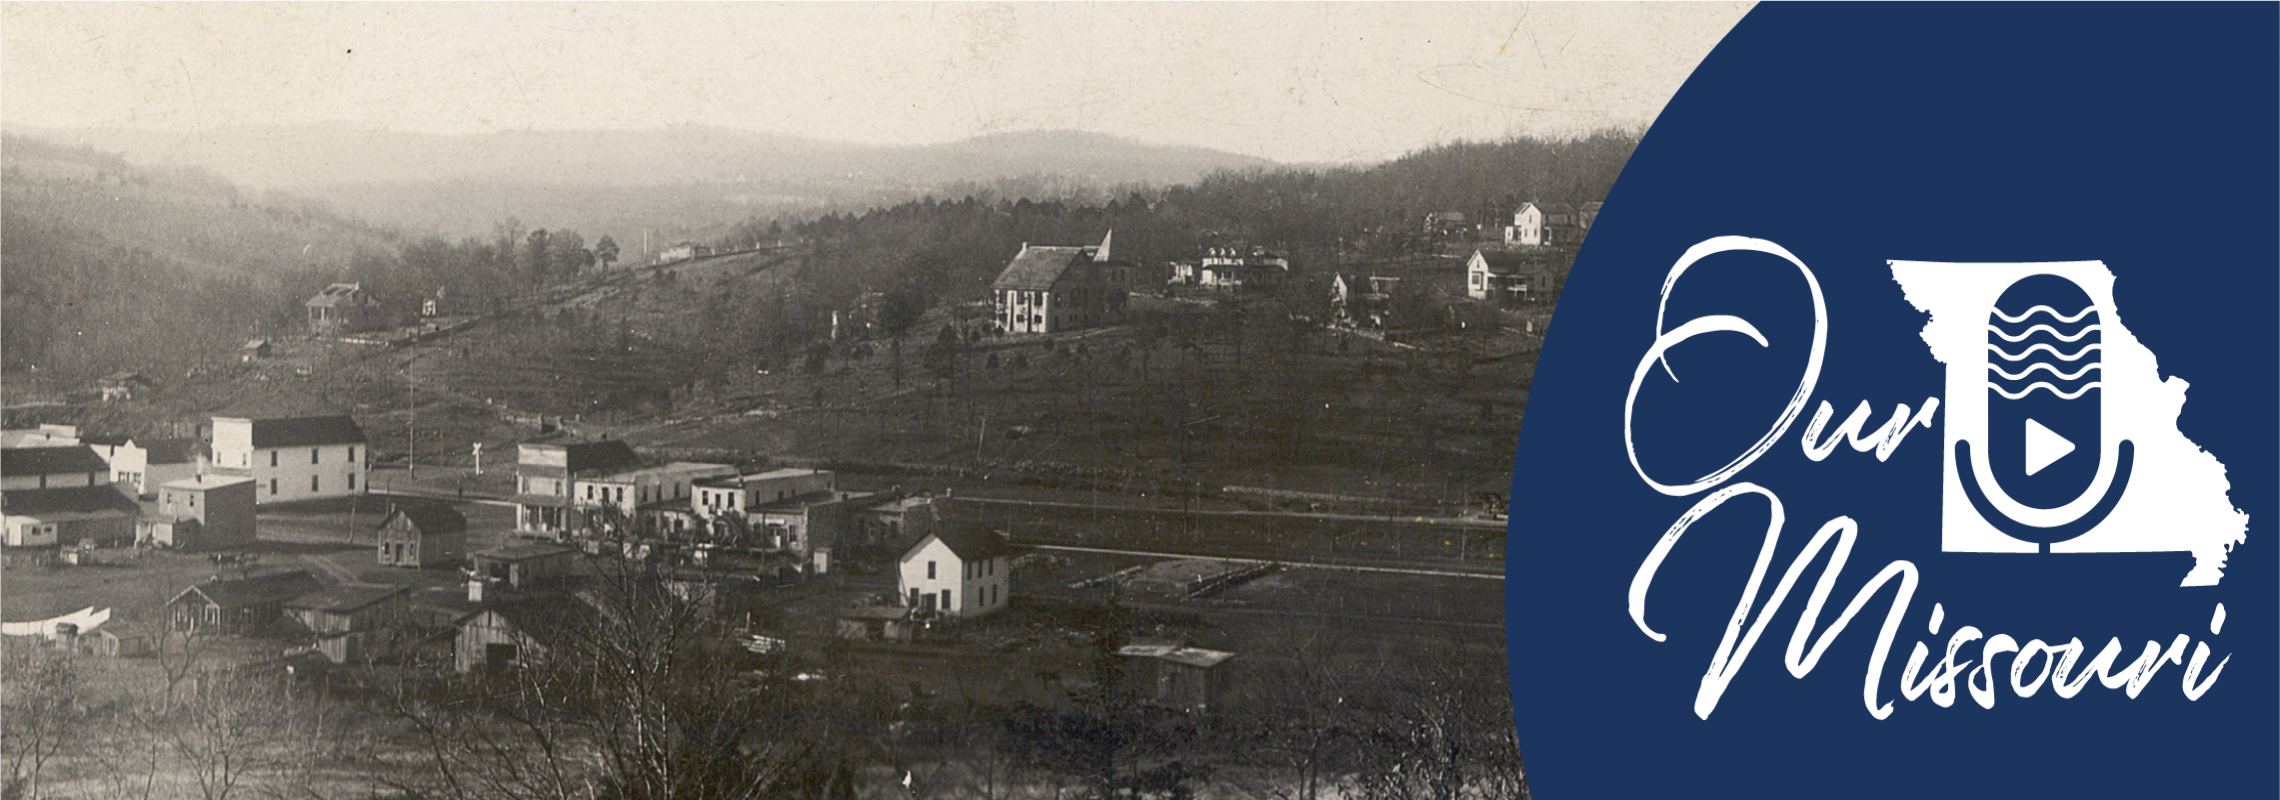 View of town looking east, Hollister, 1916. [Missouri Postcard Collection, P0032-004065-1]